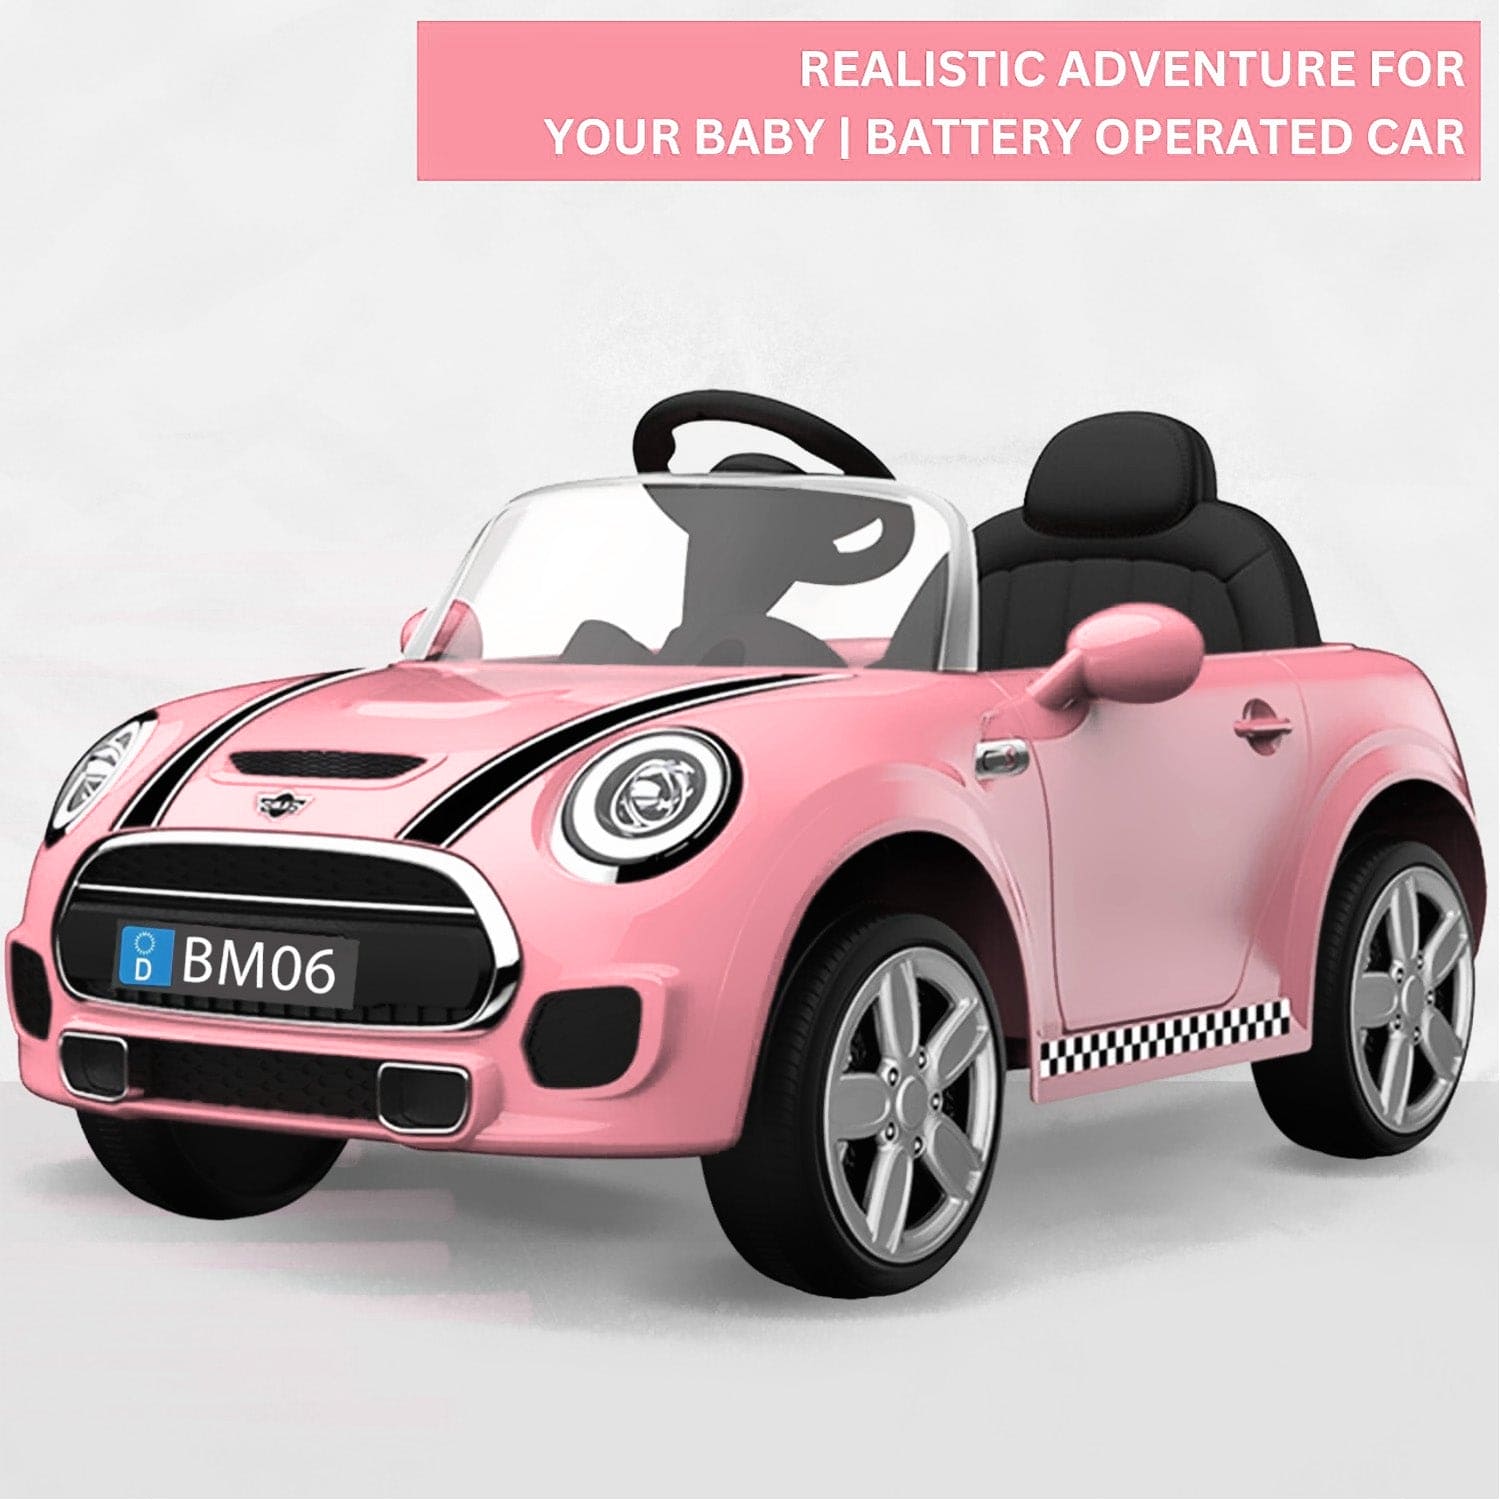 Baby Moo Mini Cooper Electric Ride-On Car for Kids | Rechargeable 12V Battery | Remote Control | USB MP3 Player | Ages 1-5 - Pink